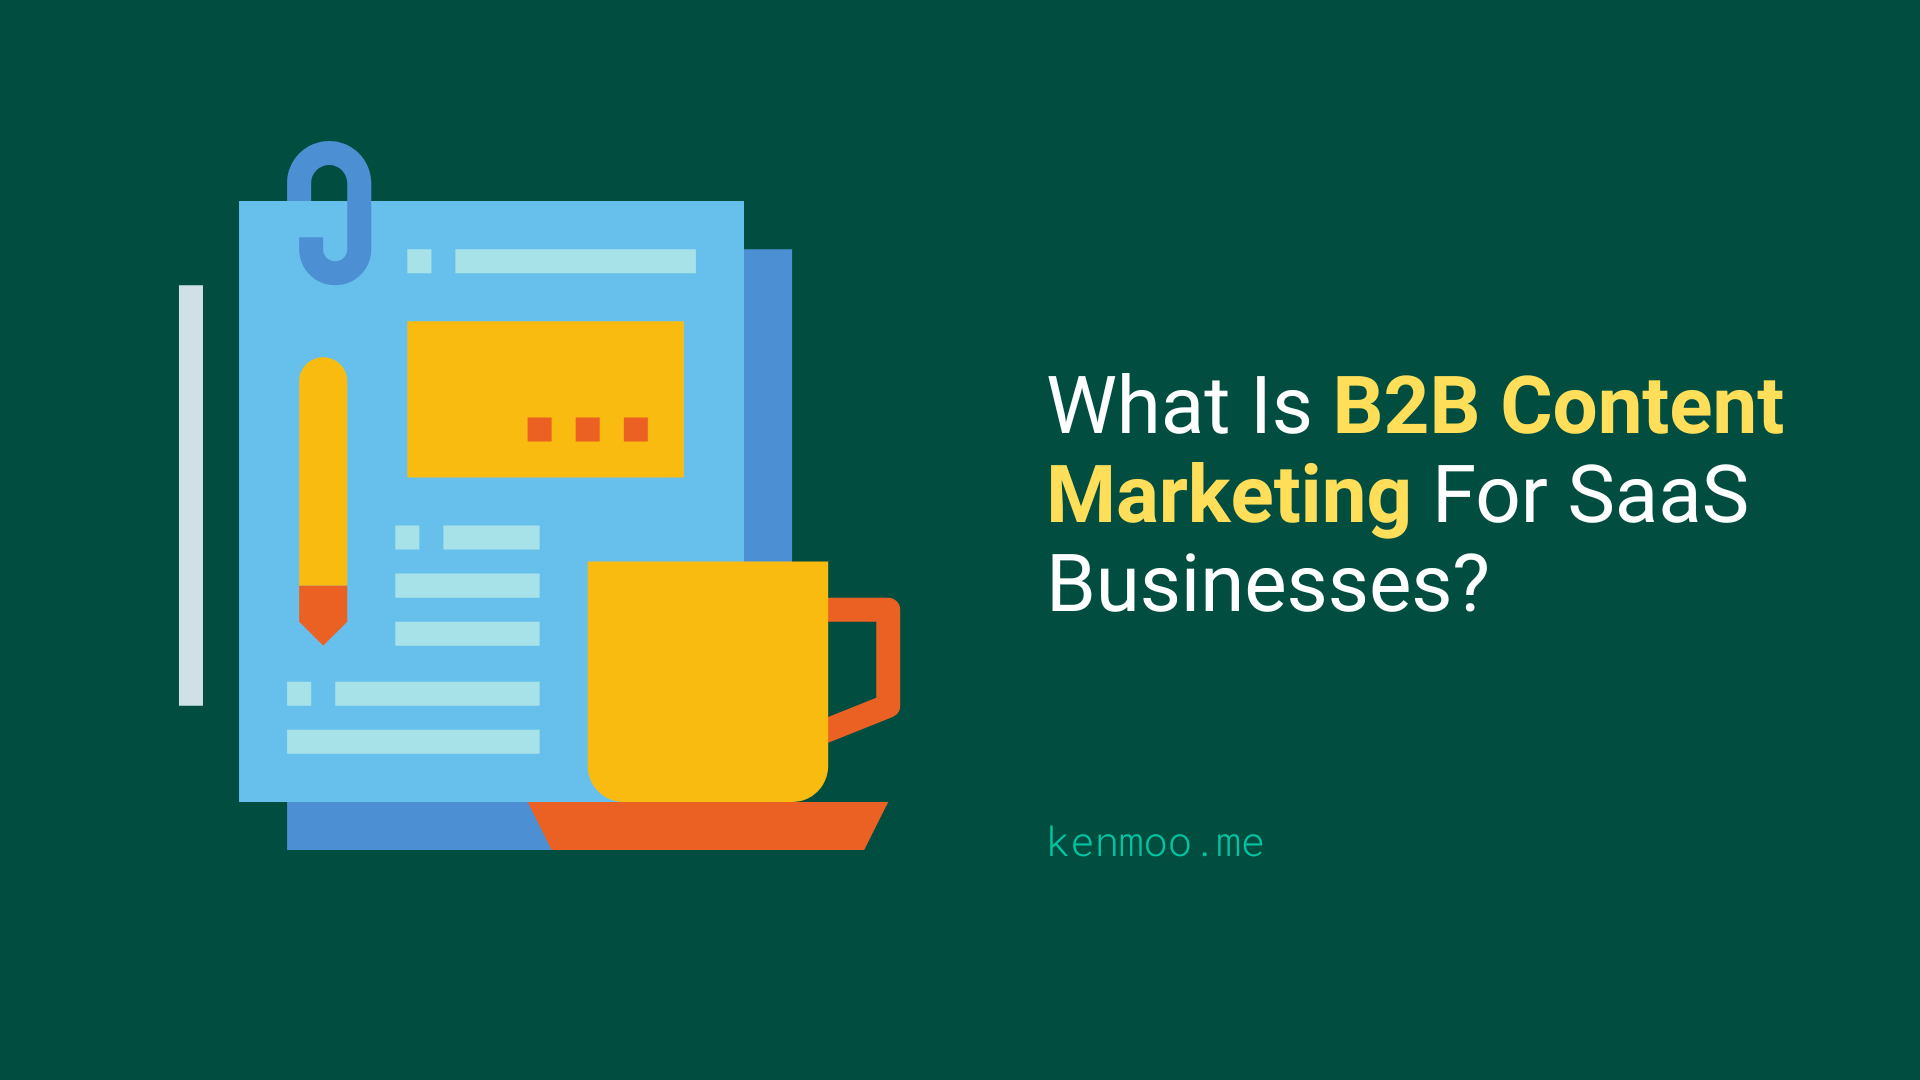 What Is B2B Content Marketing For SaaS Businesses?